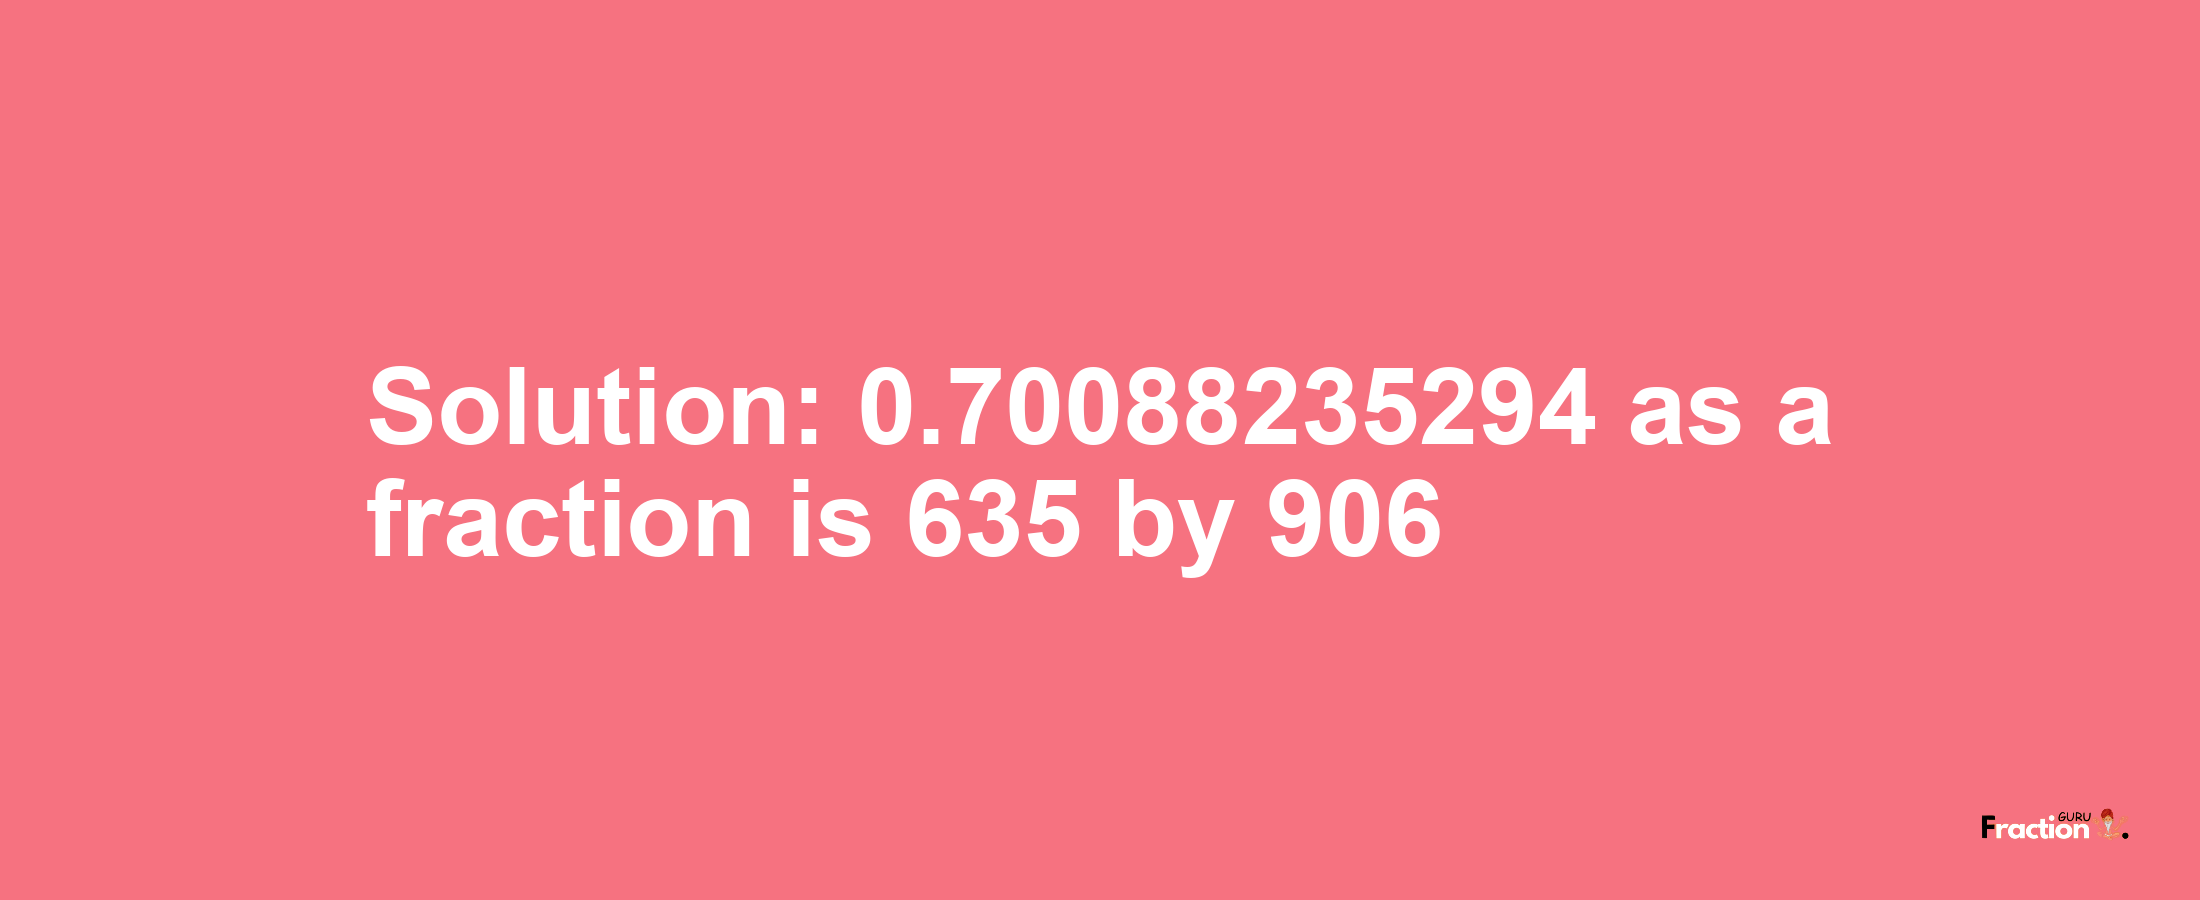 Solution:0.70088235294 as a fraction is 635/906